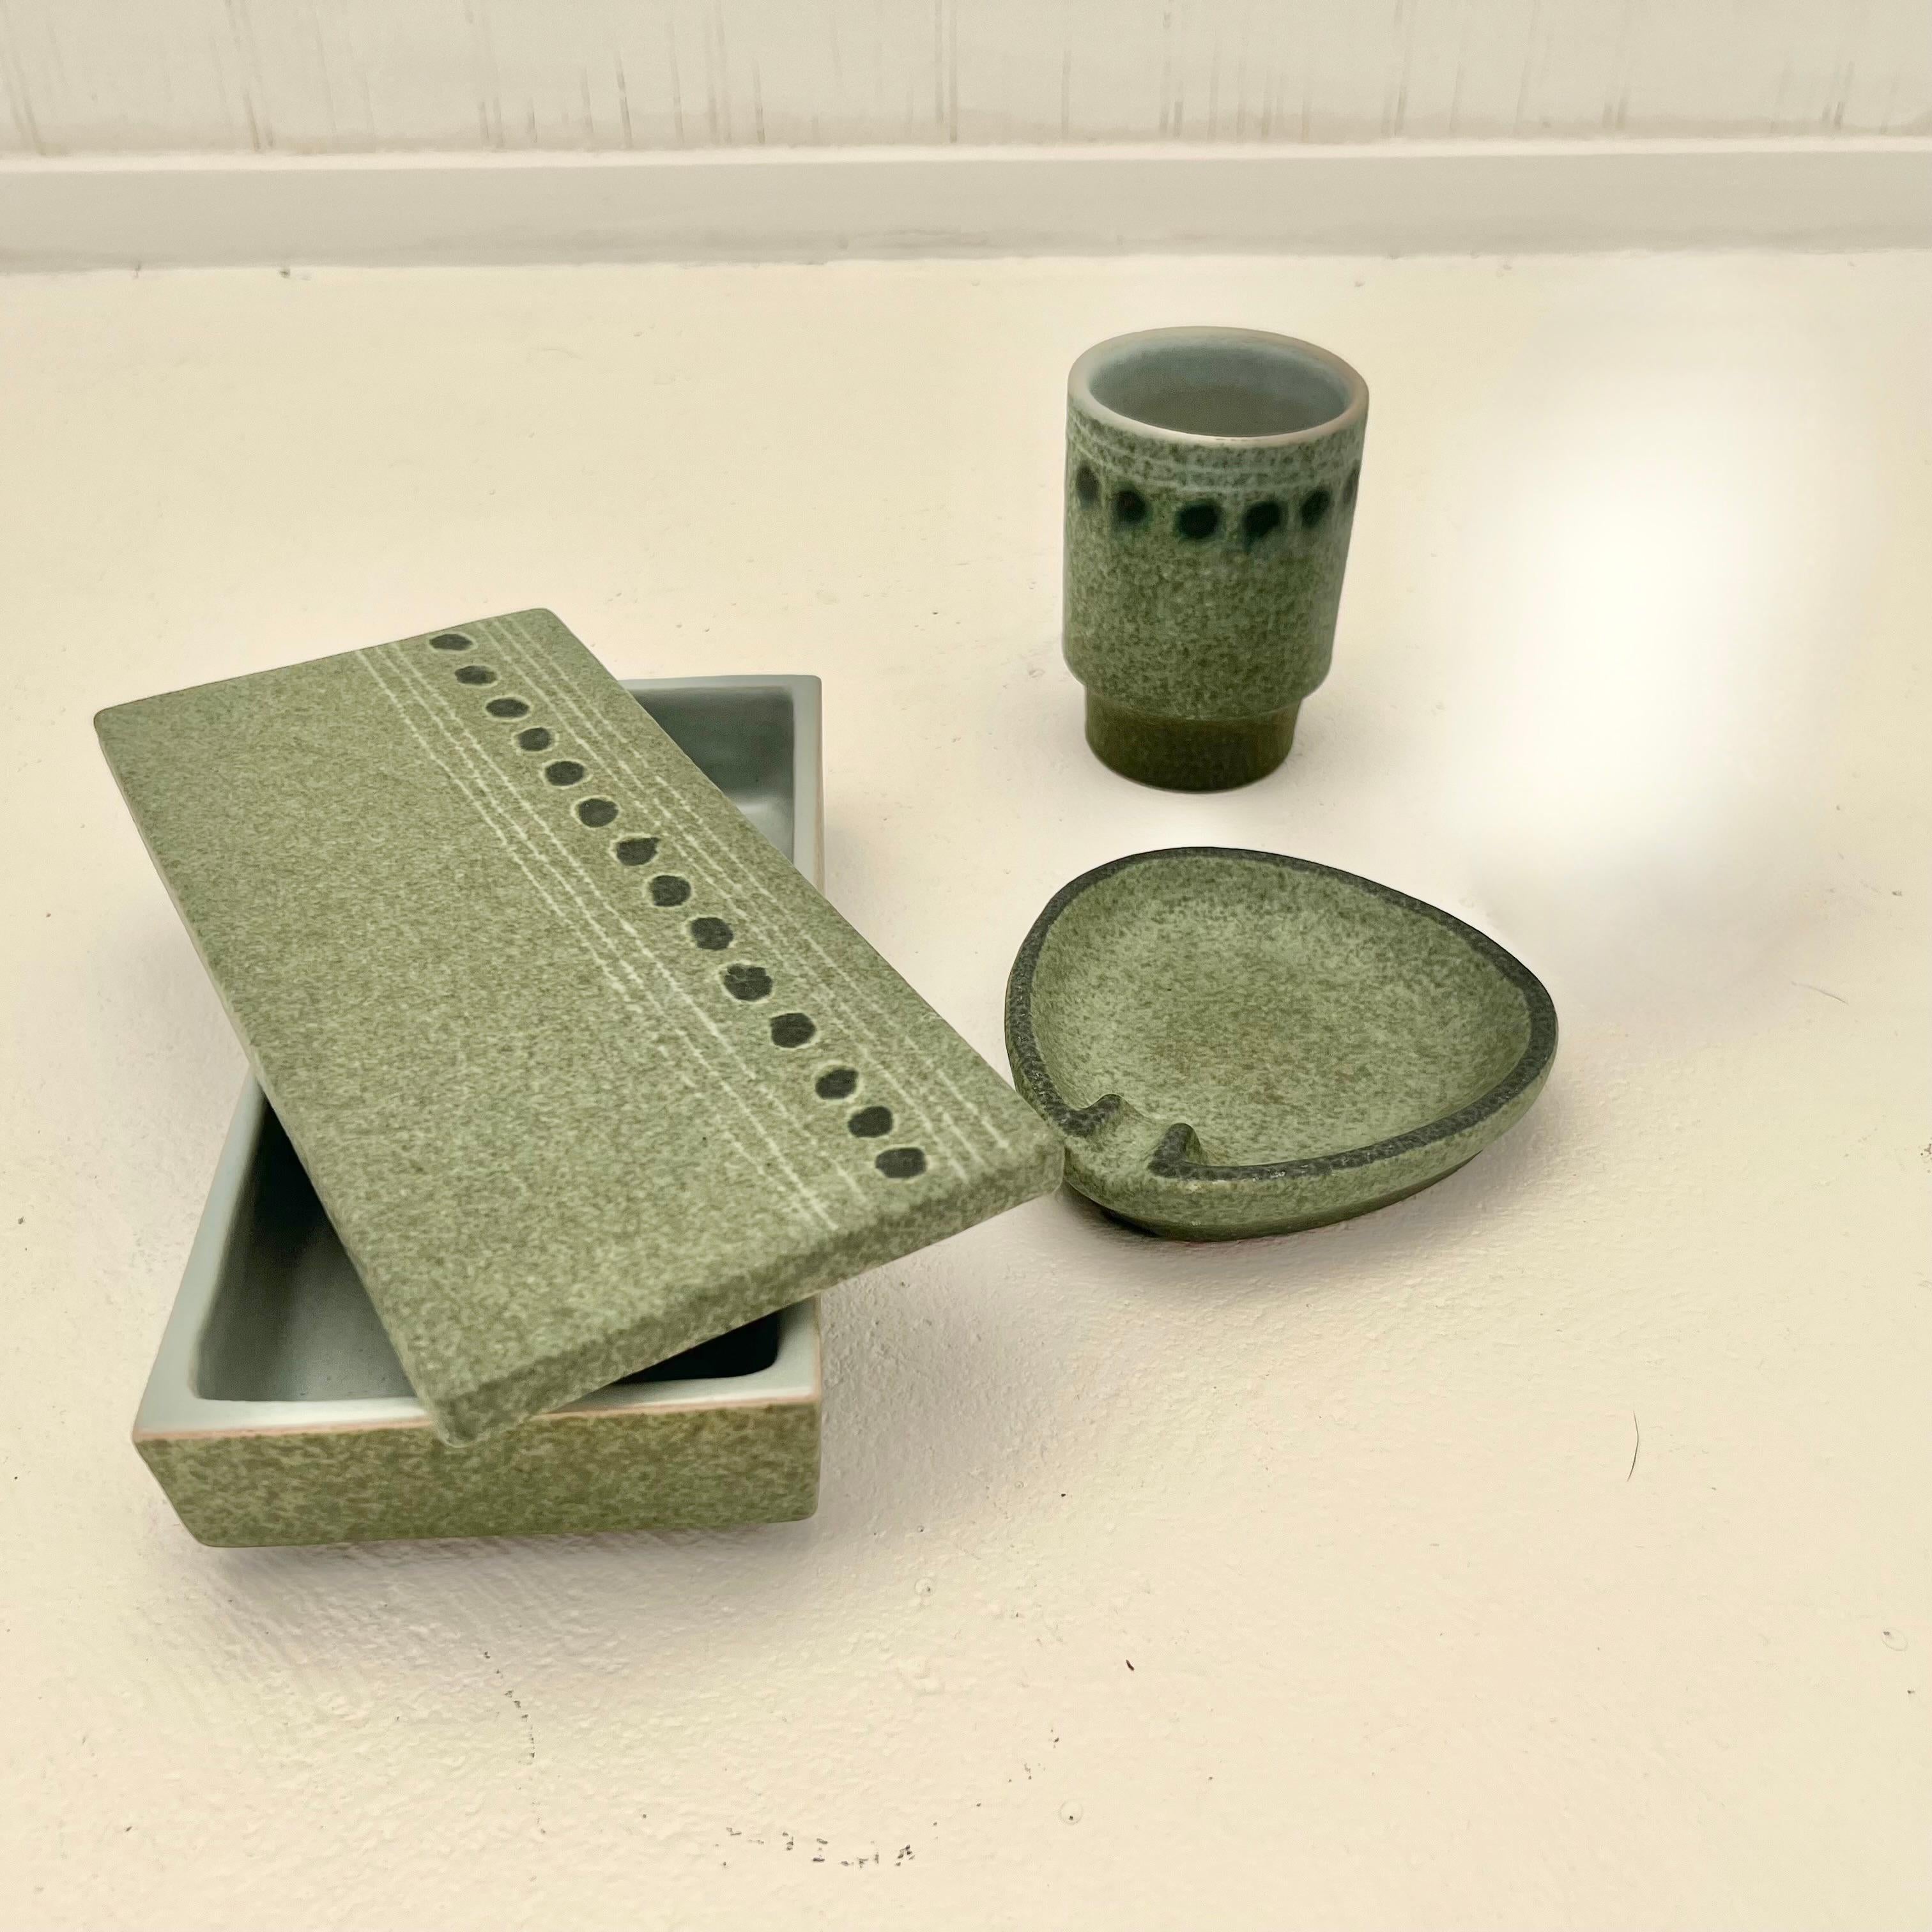 Stunning set of Valenti ceramics including an ashtray, box and a small cup. Made in Italy during the late 1980s as shown on the branded markings of the base. This rare set is in a unique hand painted mint green with dark green accent dots. Perfect